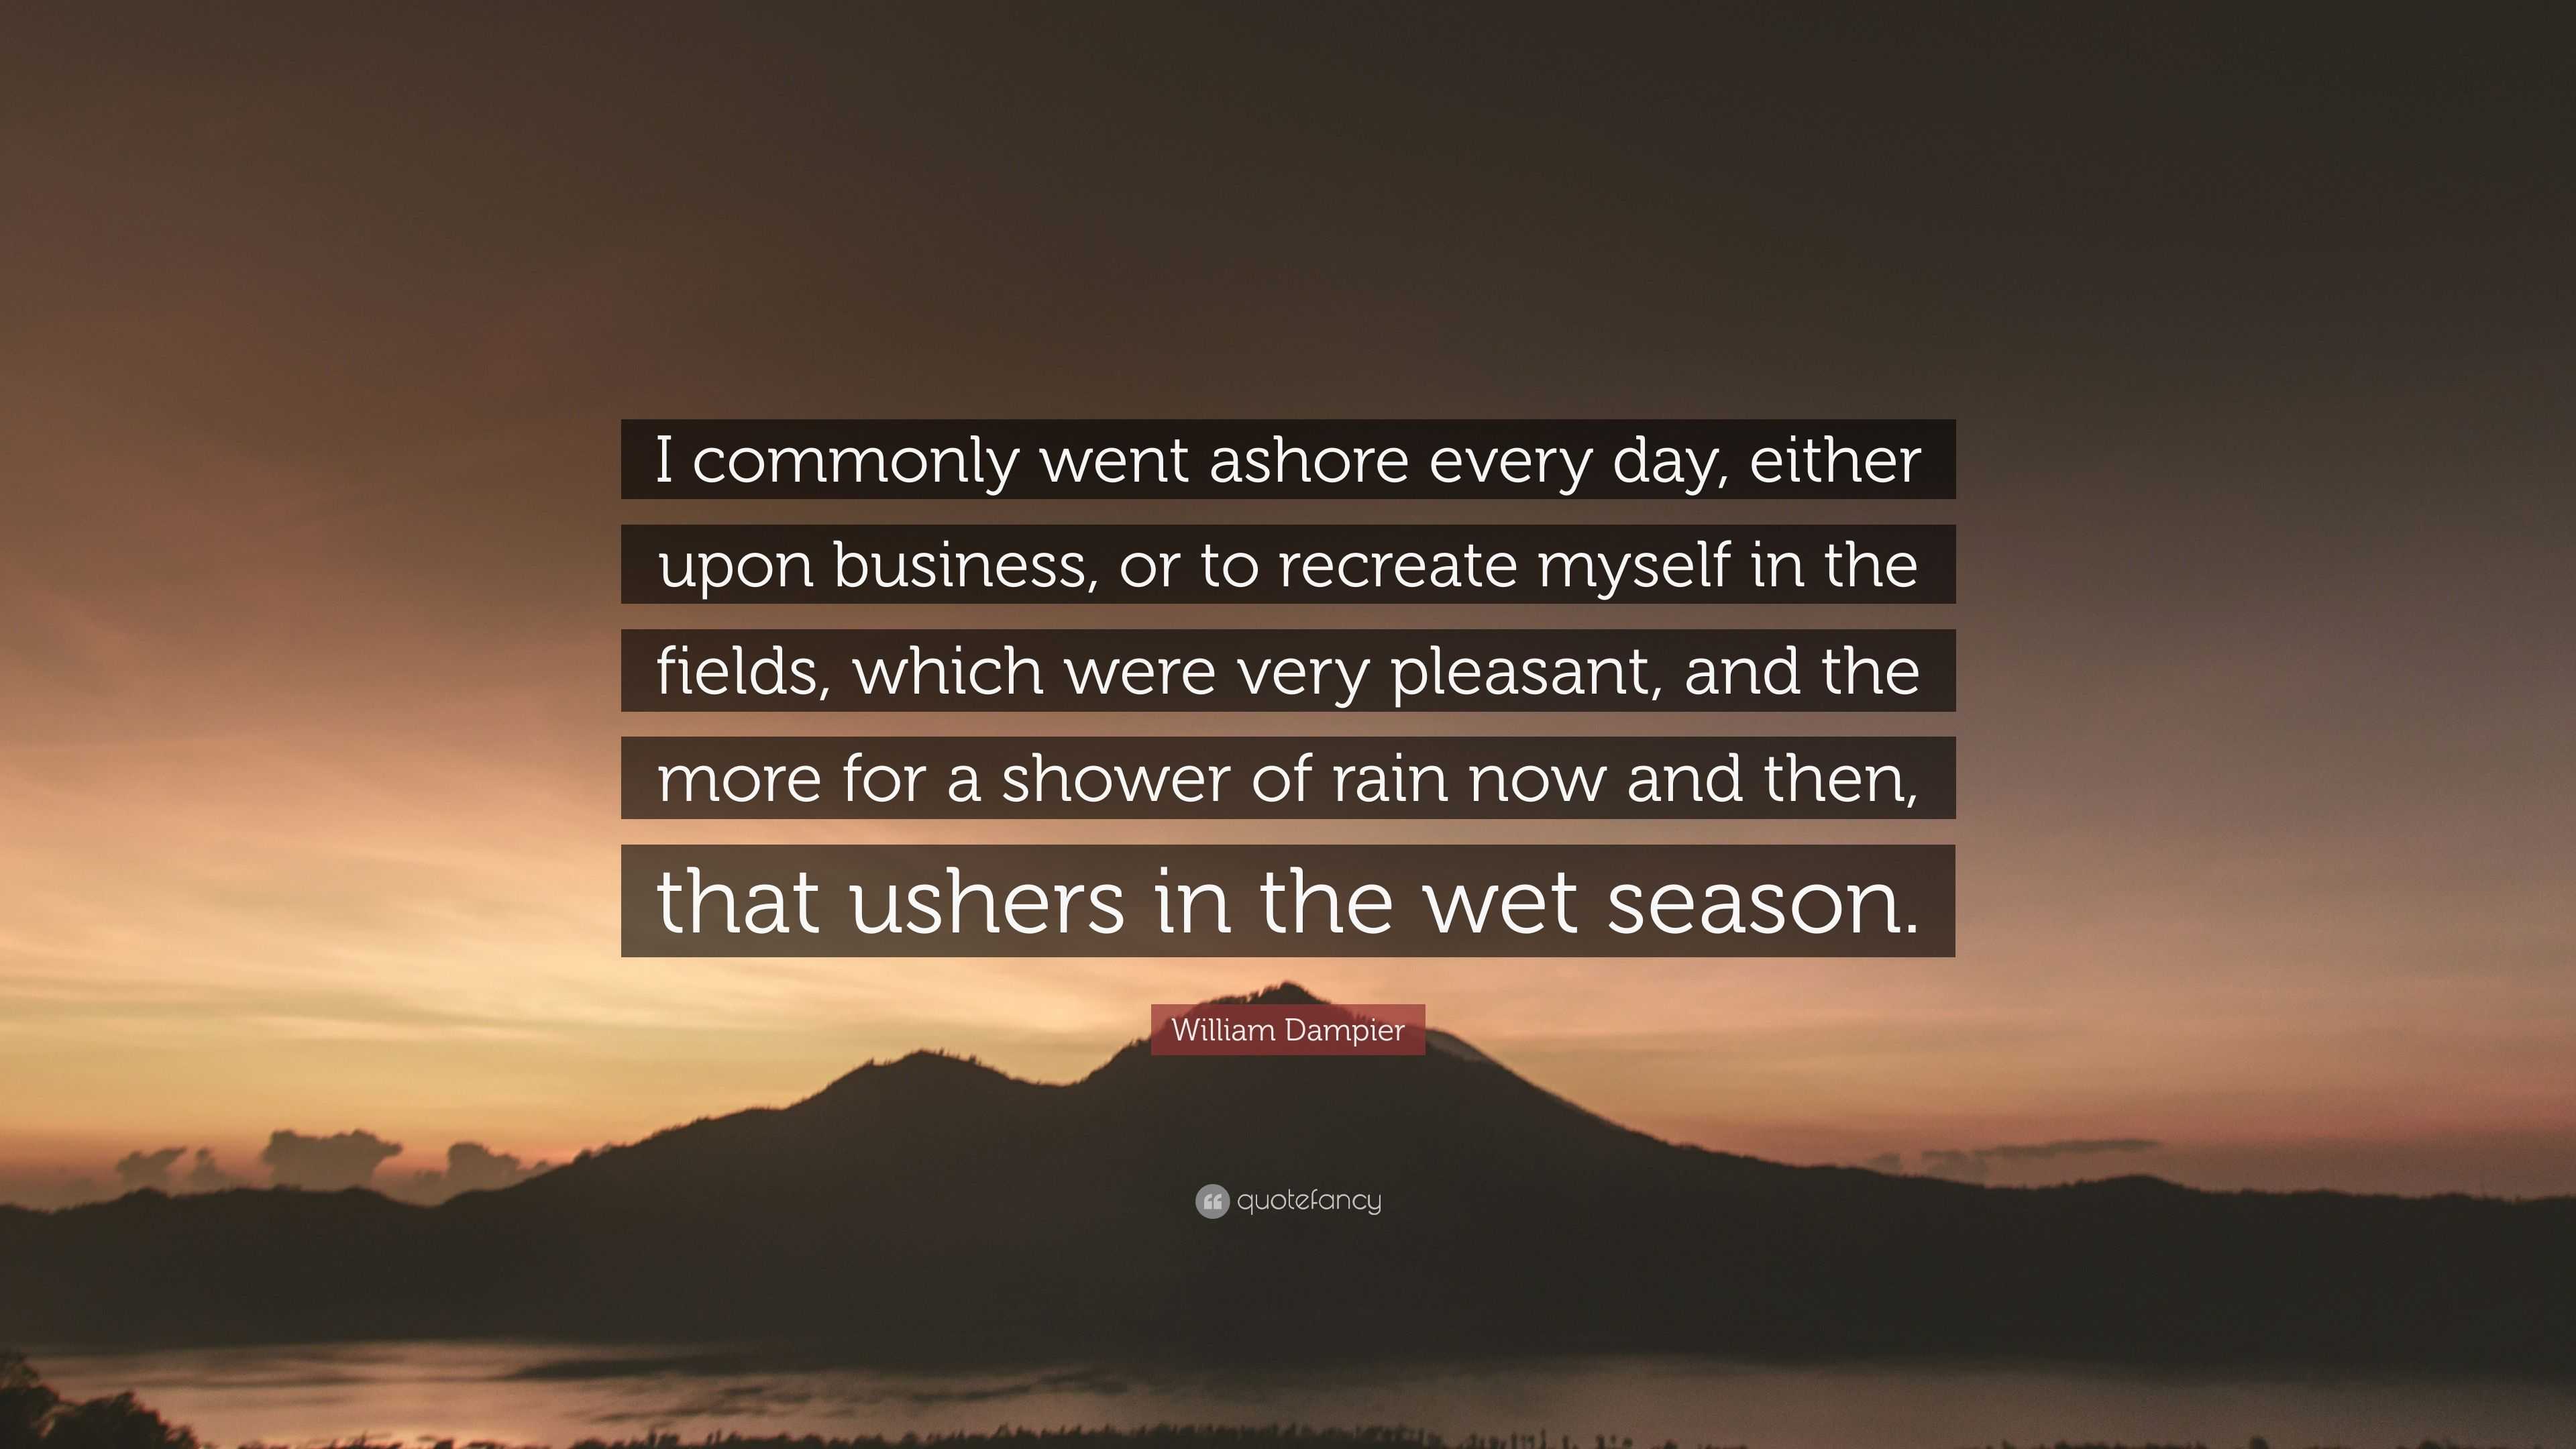 William Dampier Quote: “I commonly went ashore every day, either upon ...